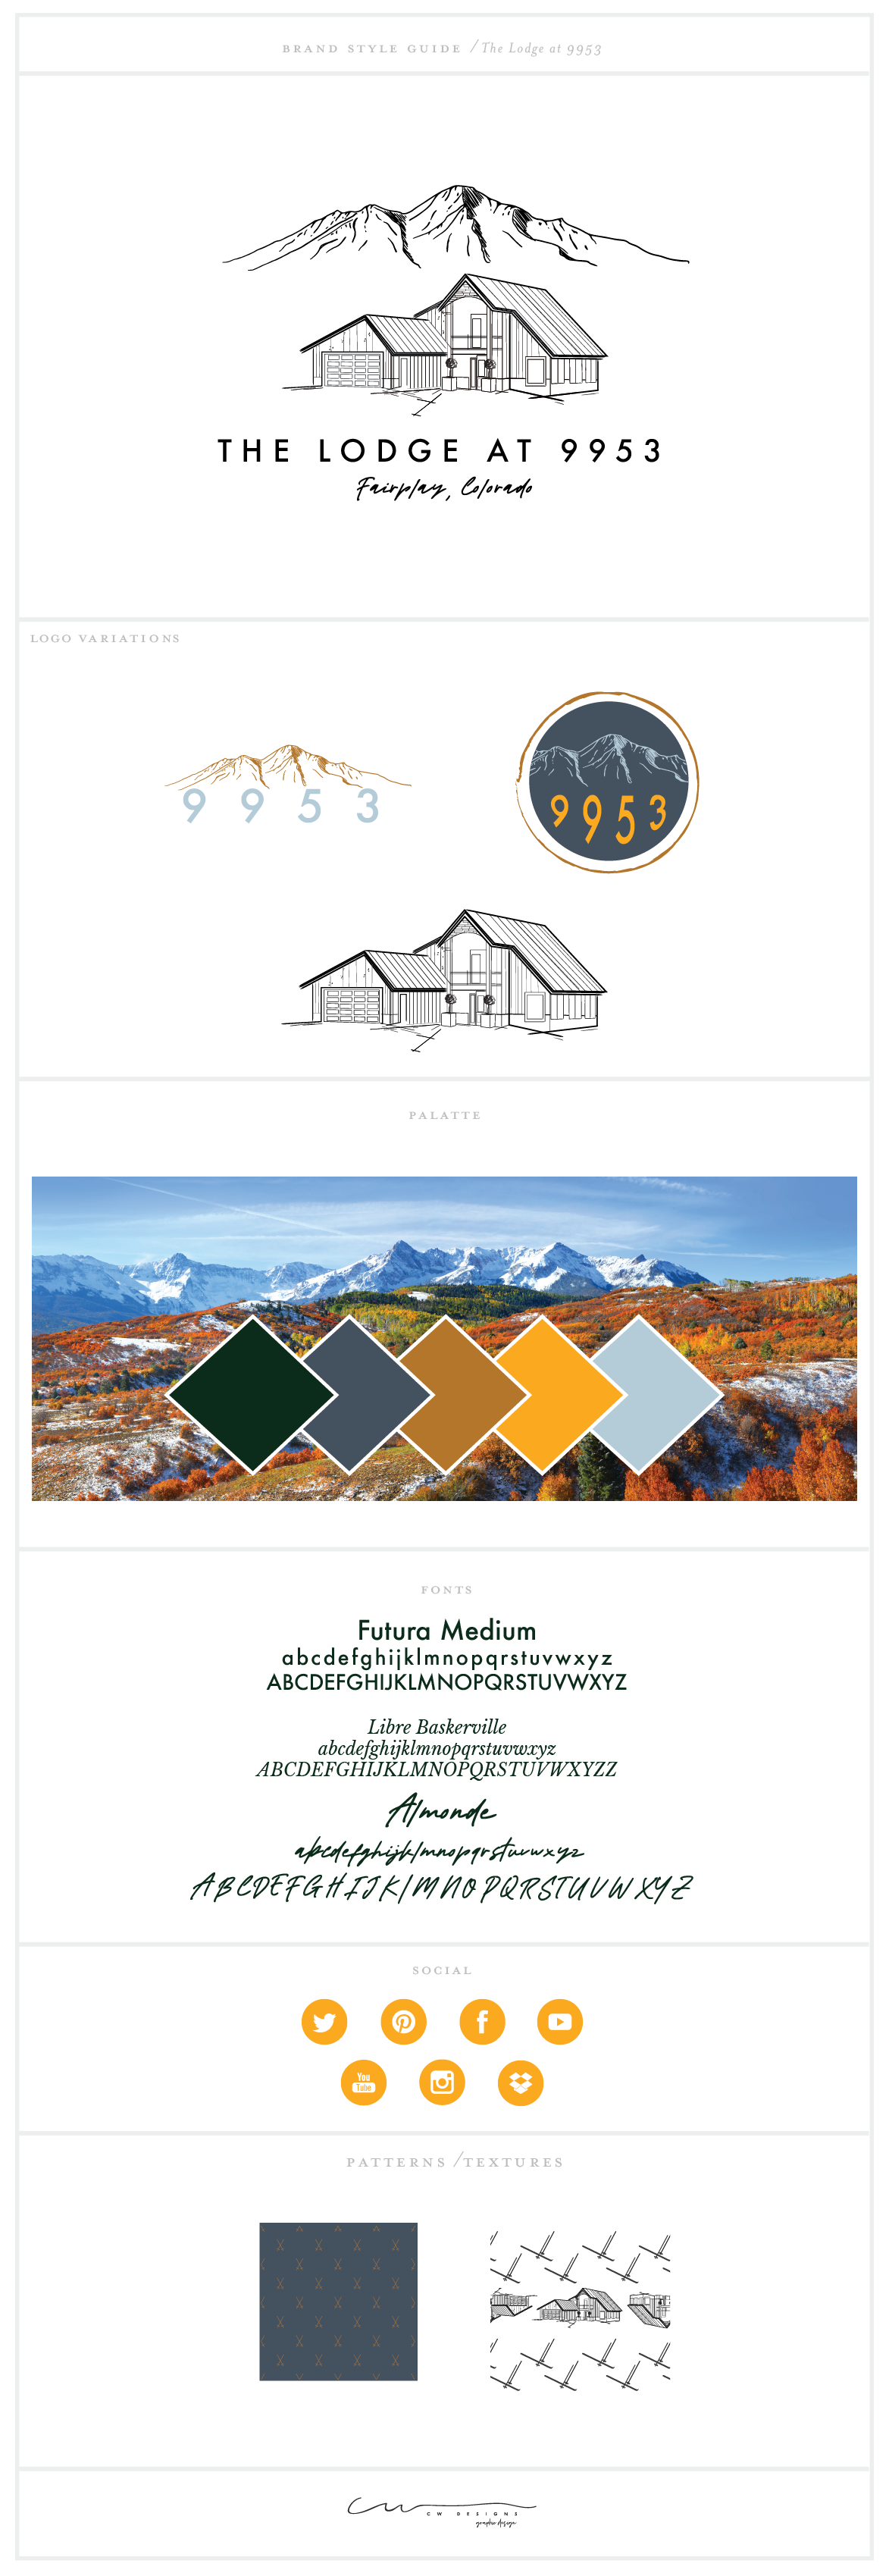 The Lodge at 9953 Branding Board-04.png